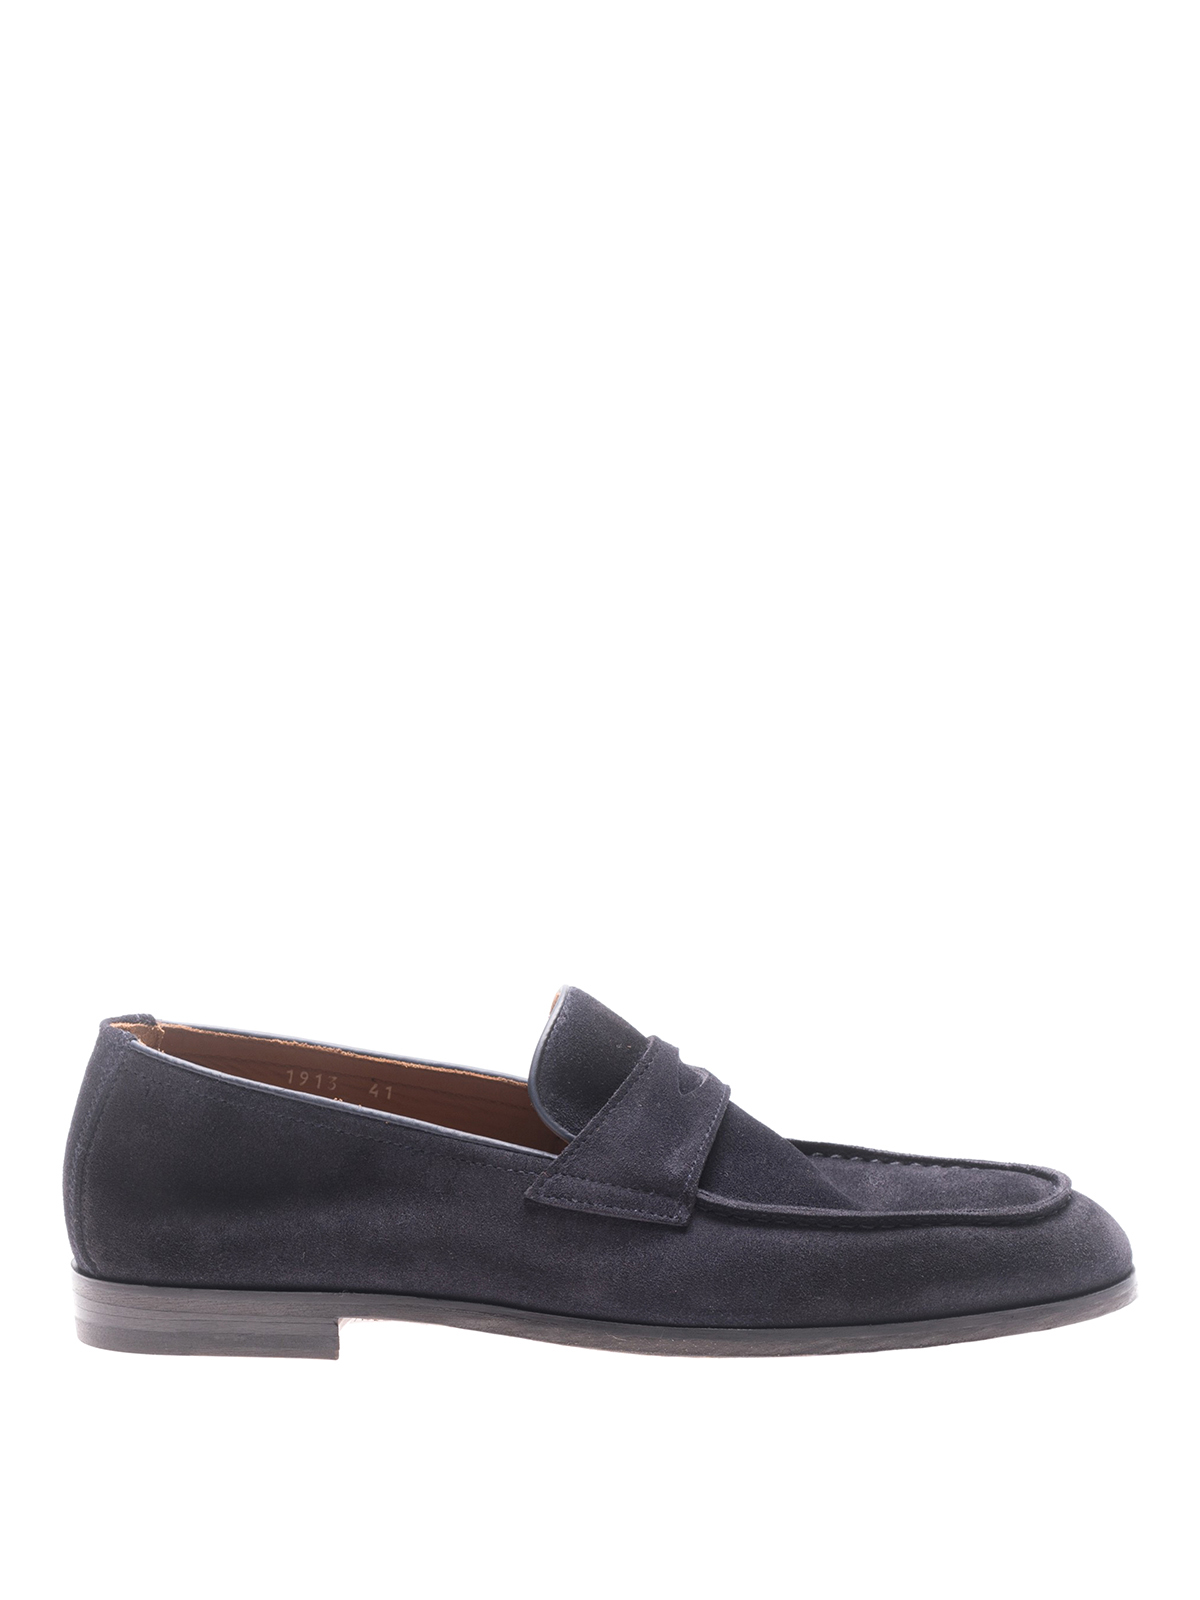 Blue suede loafers by Doucal's - Loafers & Slippers | iKRIX